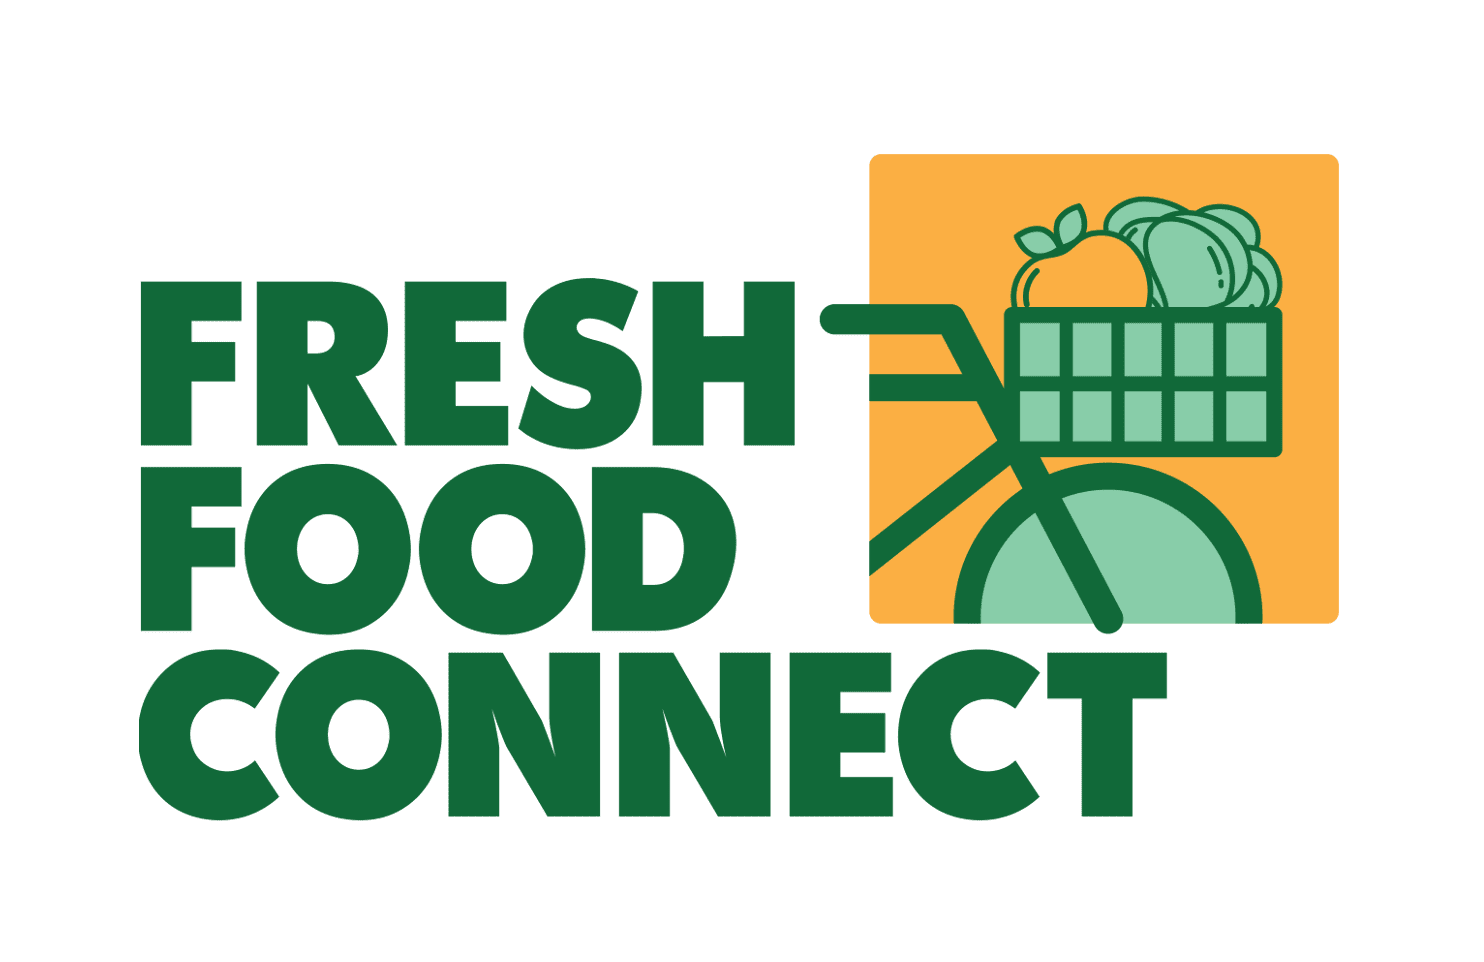 Fresh Food Connect